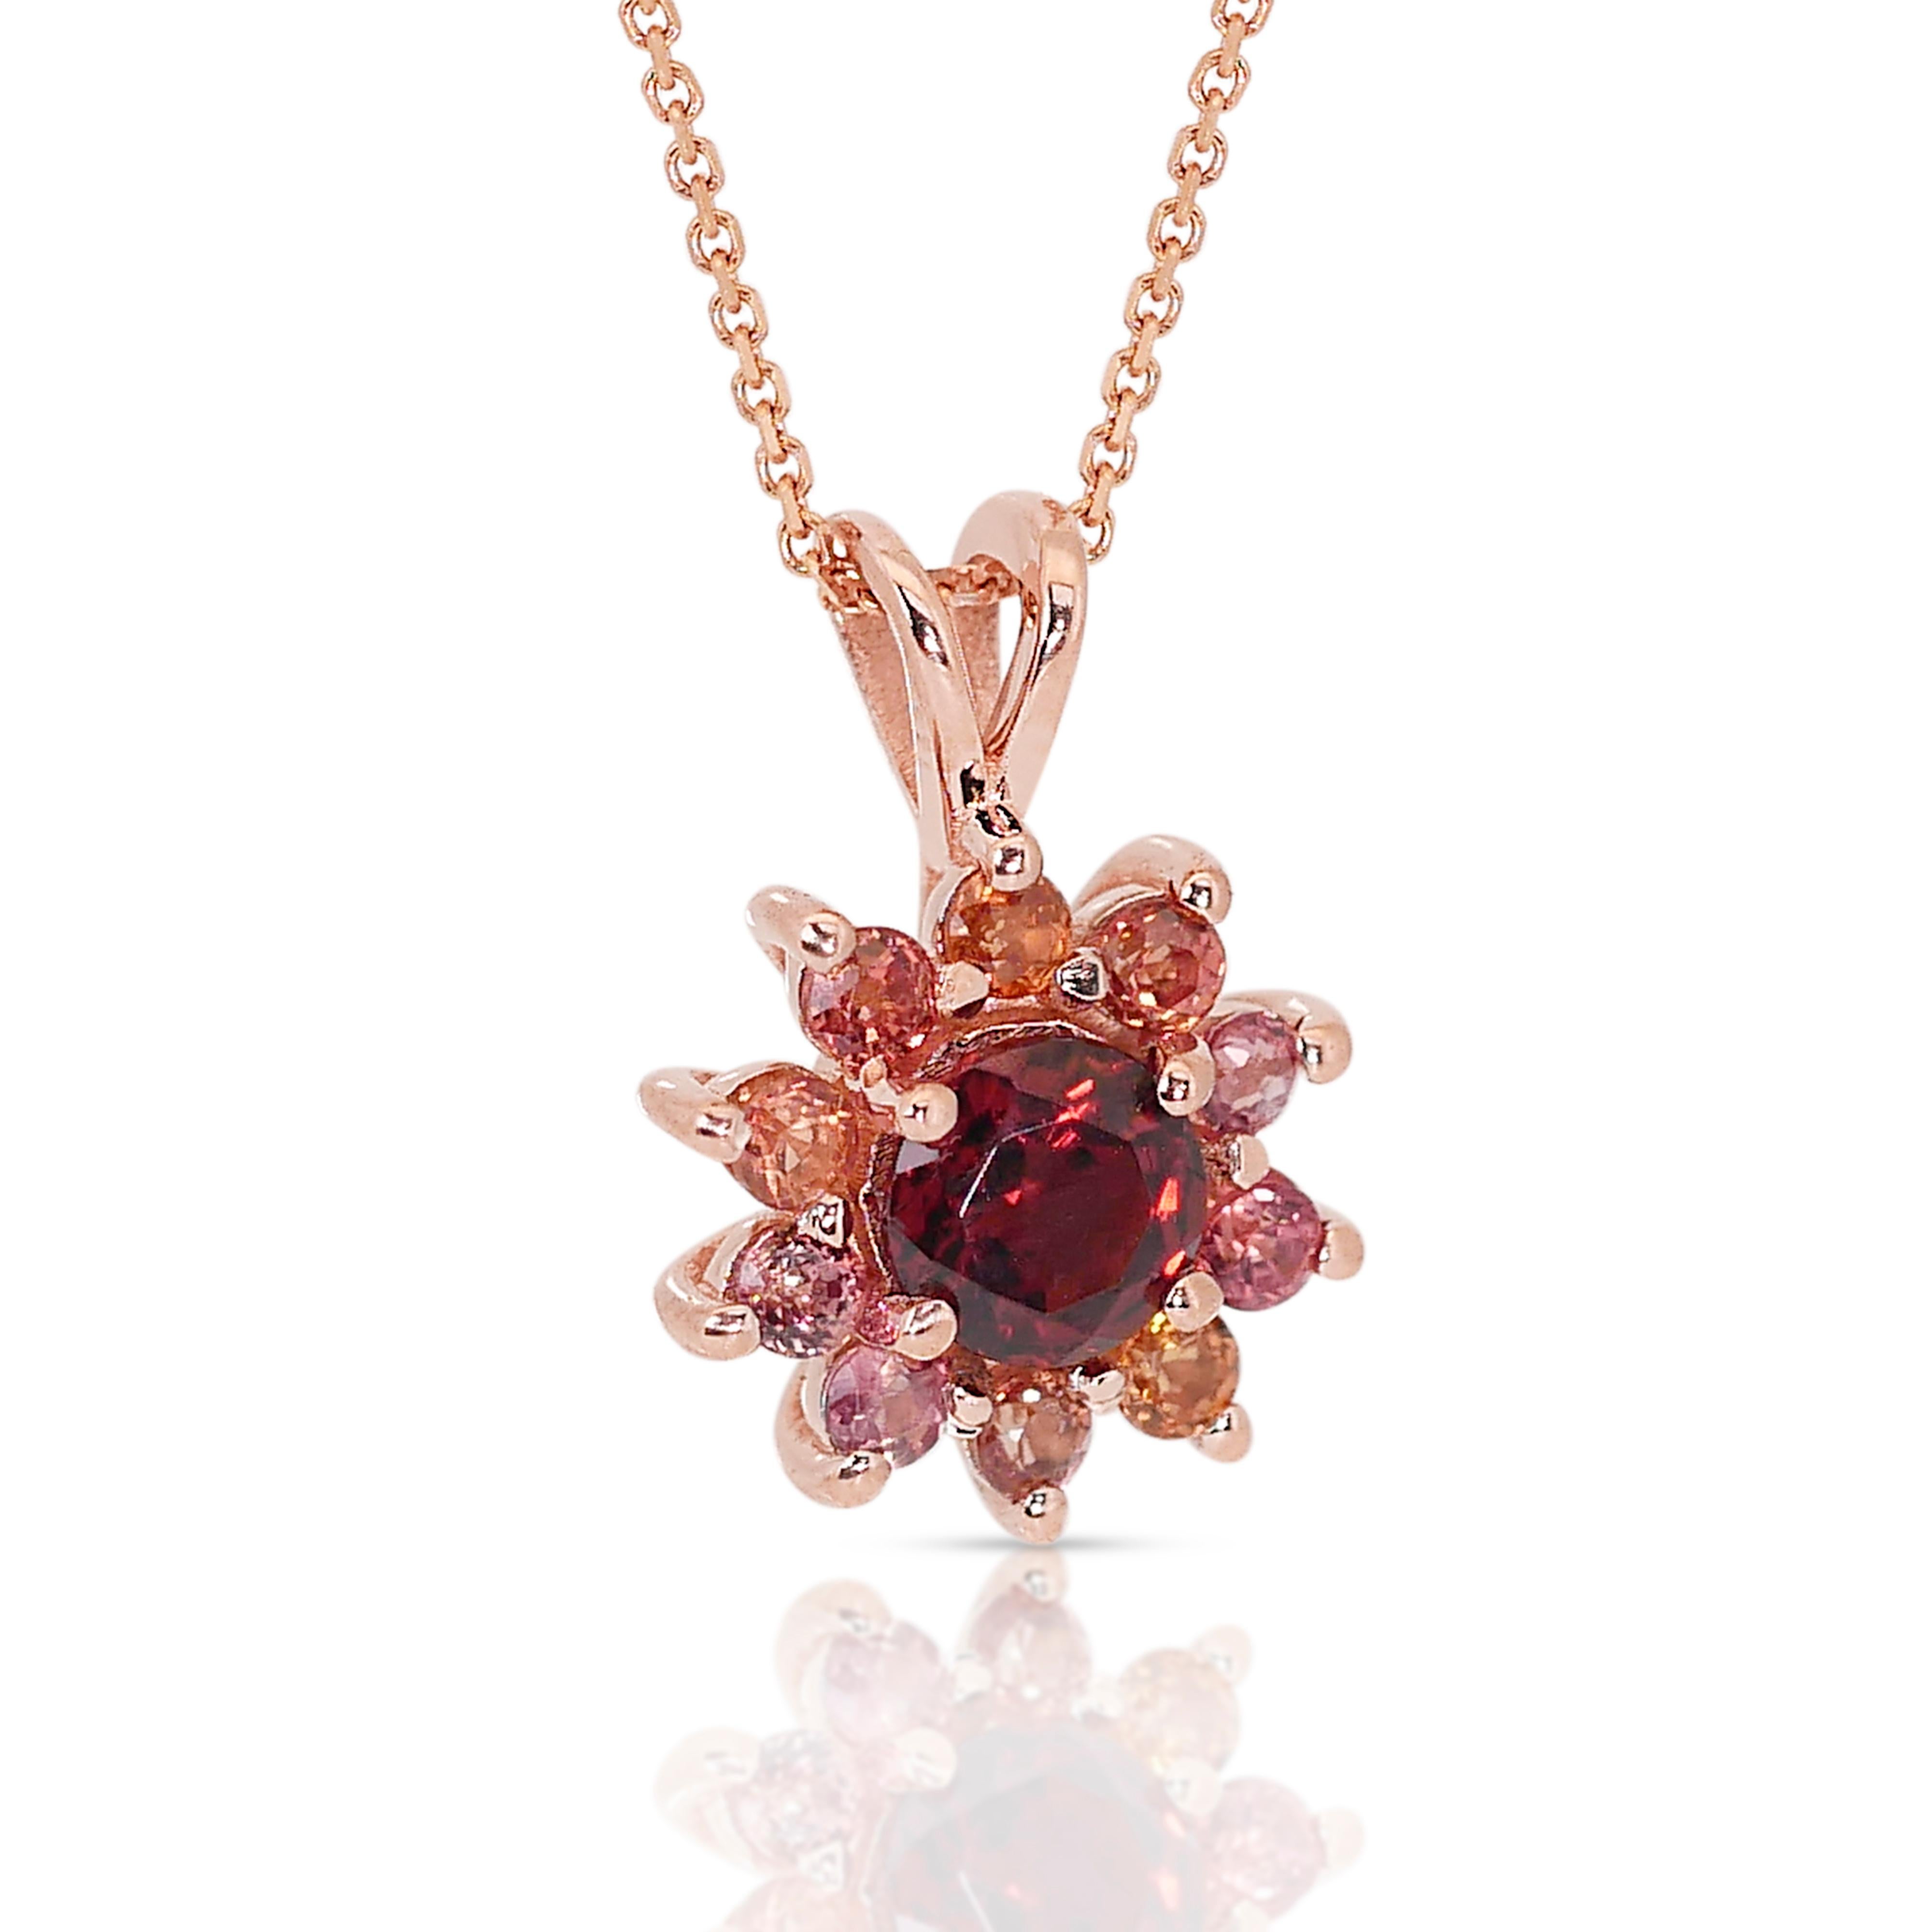 This exquisite and one of a kind necklace is meticulously crafted in 18K rose gold, adorned with a captivating garnet gemstone. Surrounding the garnet are a cascade of dazzling sapphires, each one meticulously chosen for its exceptional brilliance